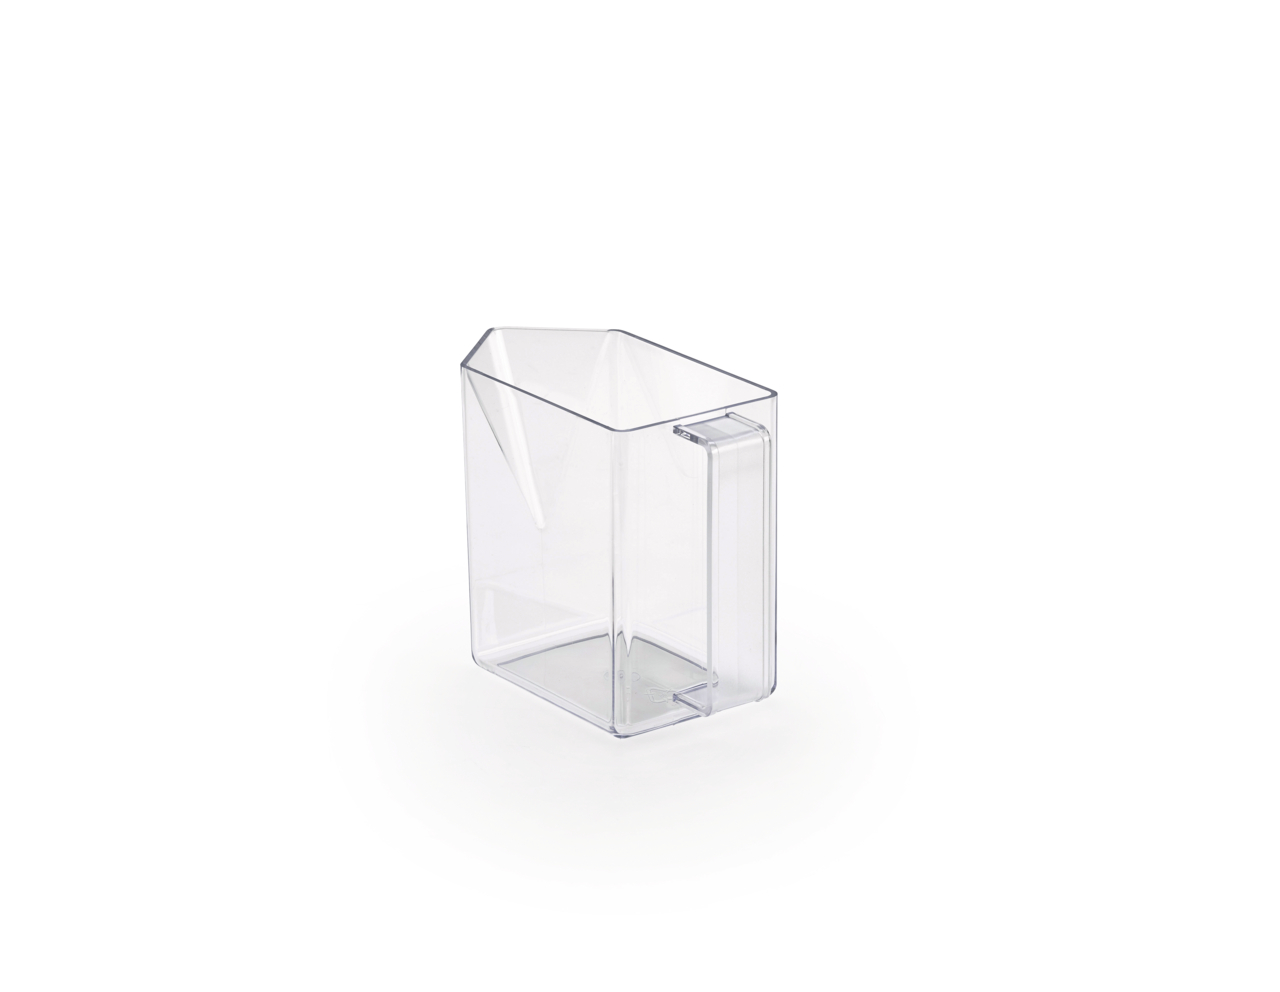  Individual drawer container De Luxe, crystal clear